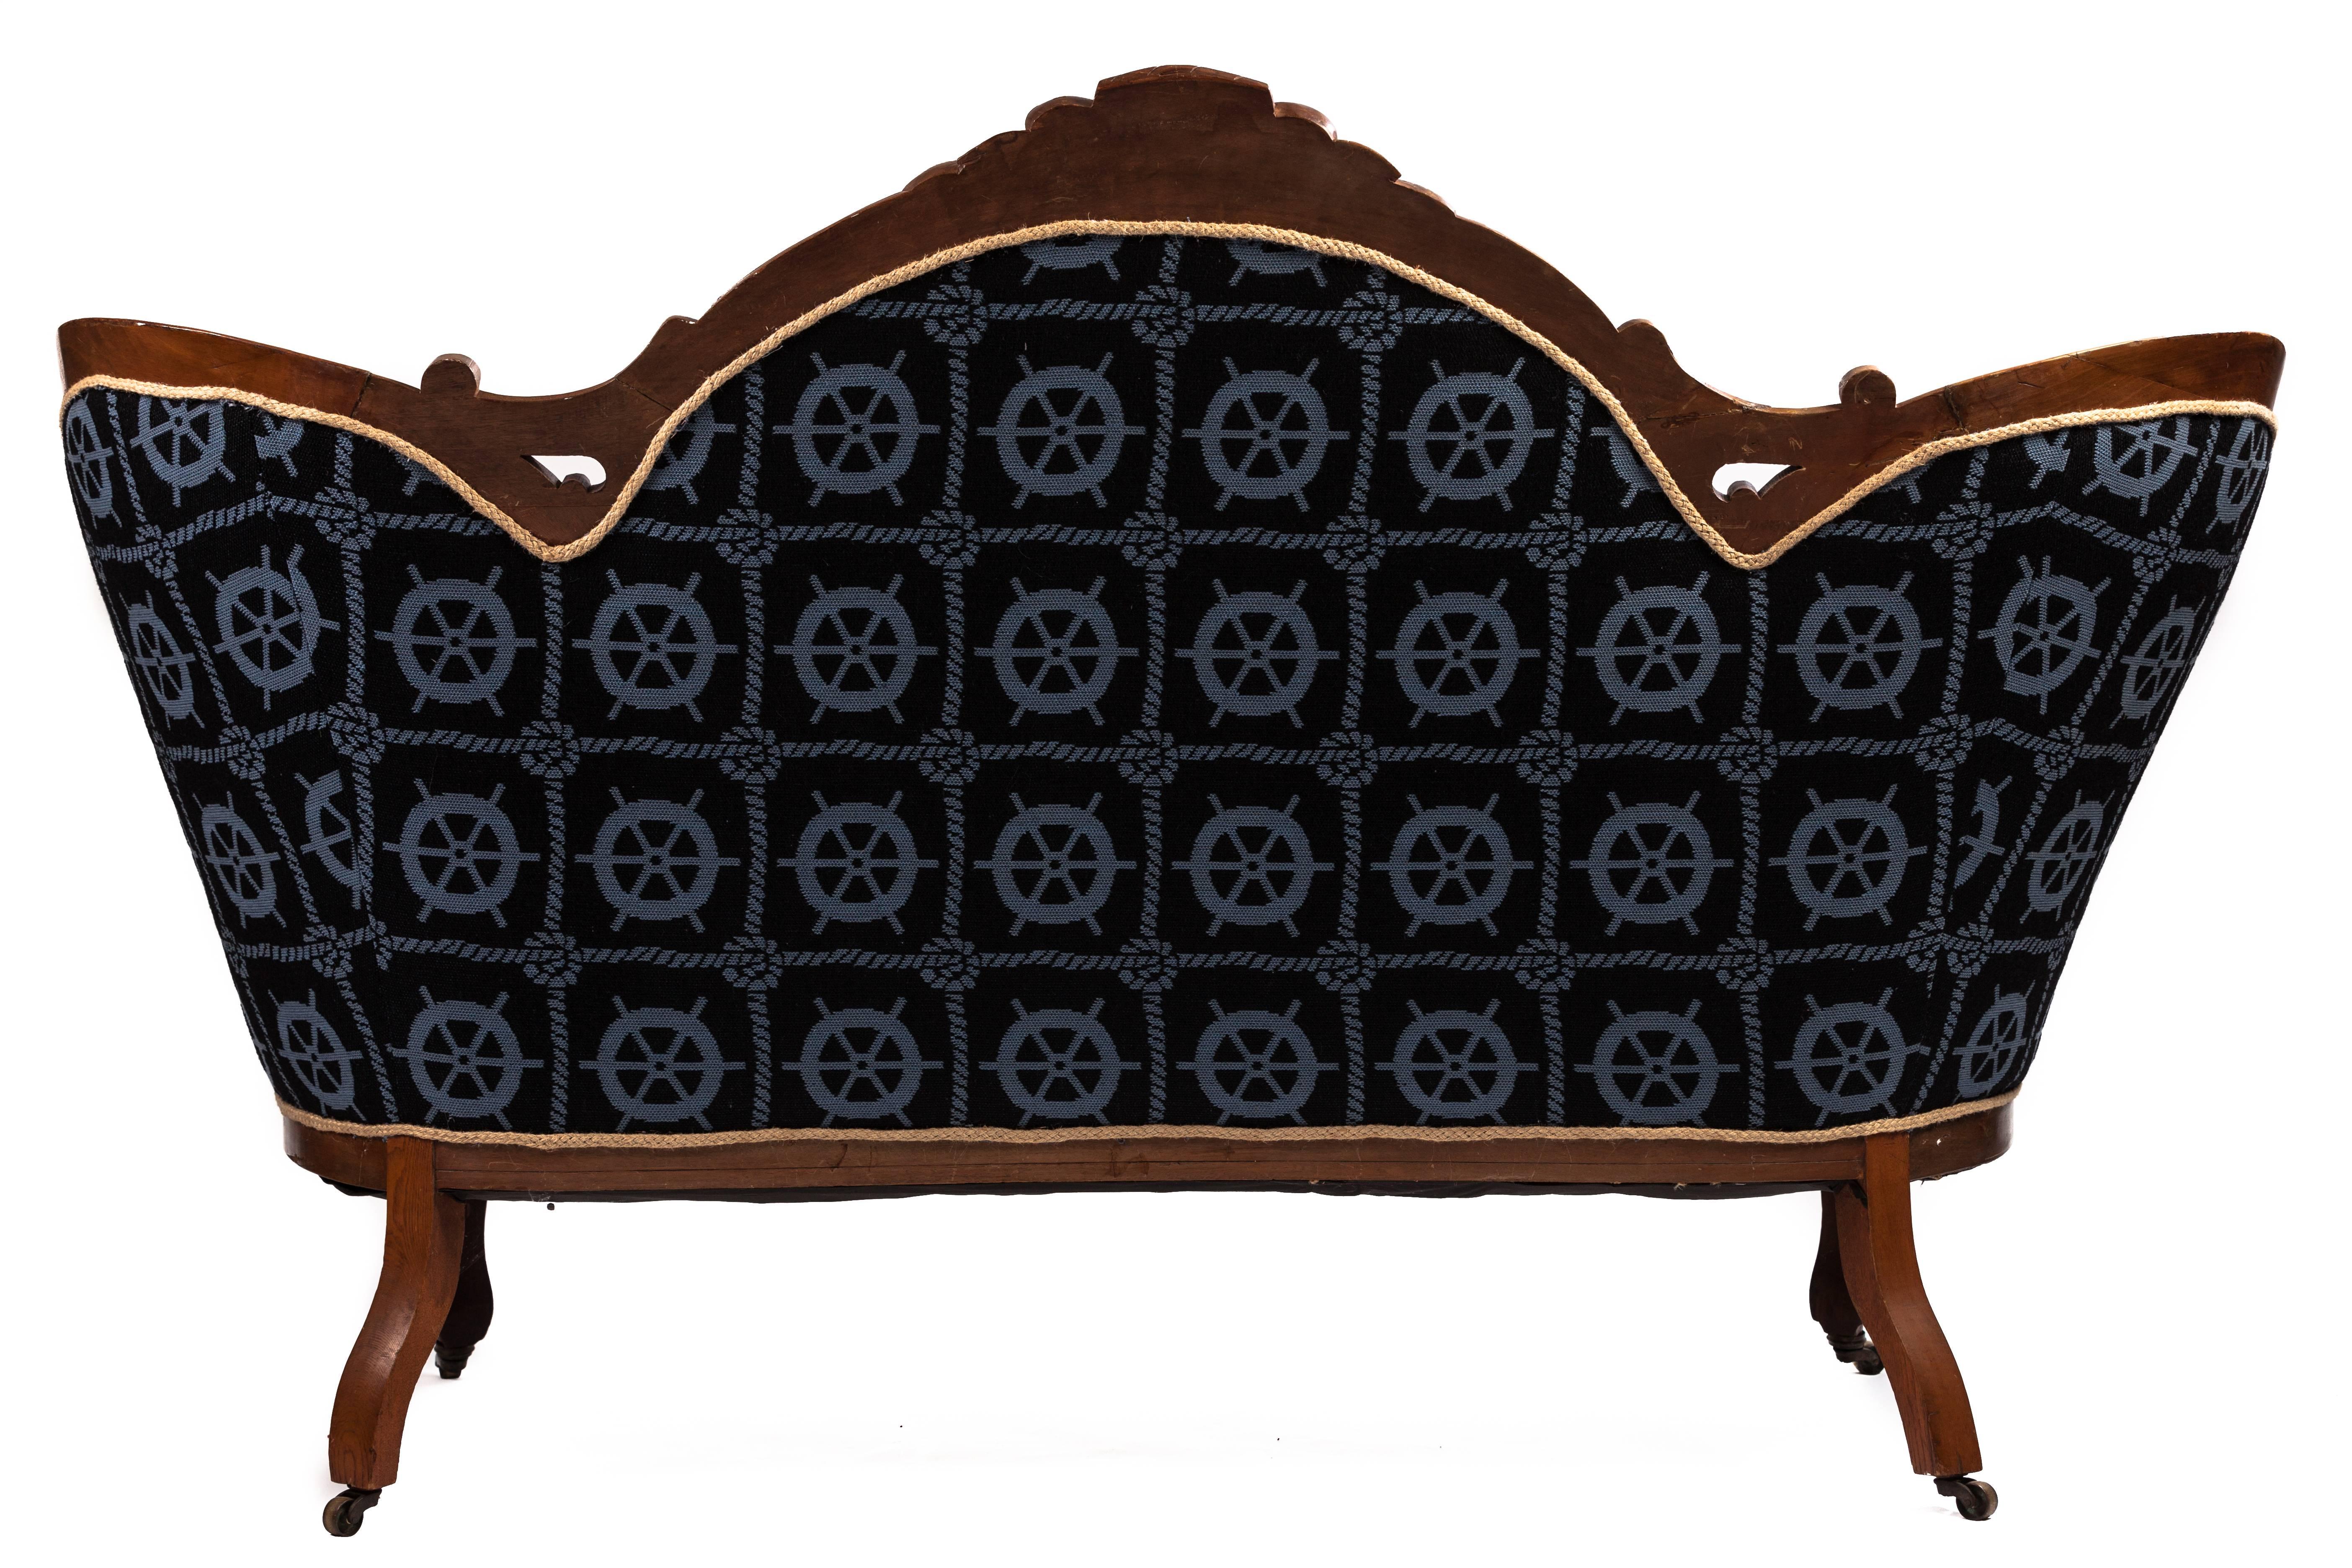 Nautical Upholstered 19th Century Victorian Settee. Custom Ship's Wheel with Rope repeat Textile, Compass-Rose Back Rest in Various Felts, and Natural Rope Trim really bring this Antique piece into the 21st Century. Nautical Chic by Anthony